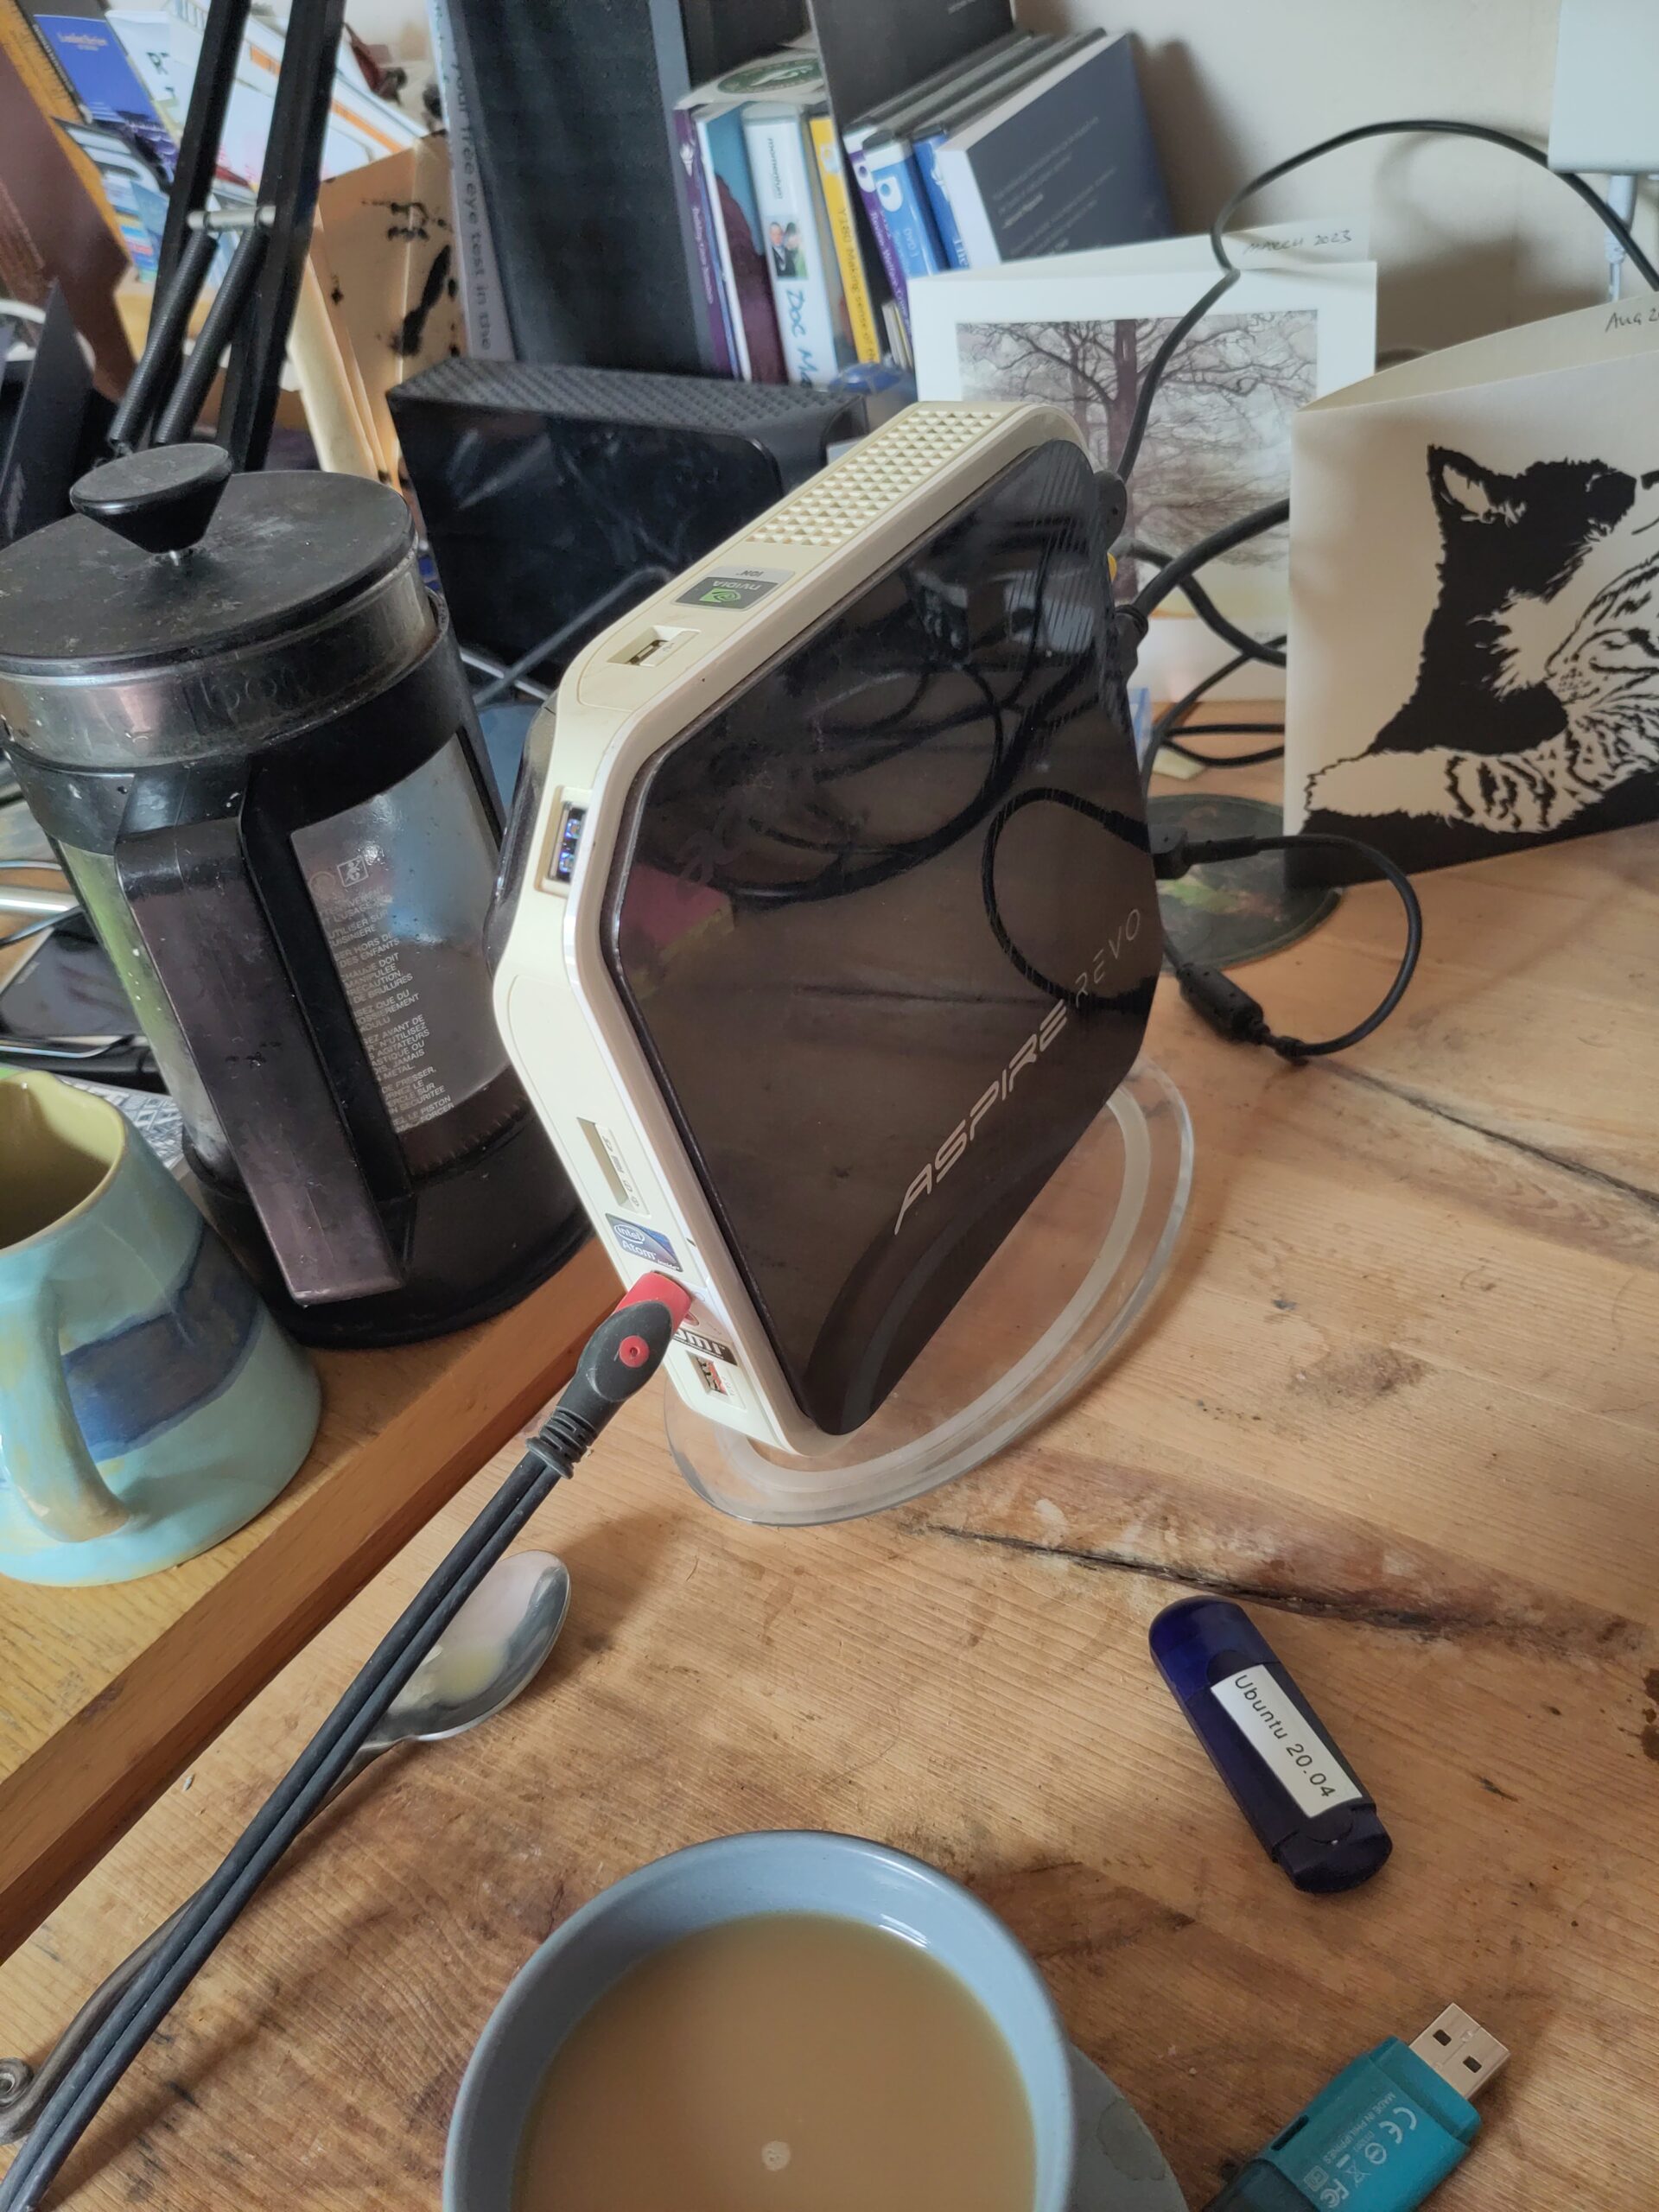 A small computer of peculiar design sits on a chaotic desk, with a pot of coffee, a cup and saucer, a jug of milk, and a memory stick labelled, "Ubuntu 20:04"